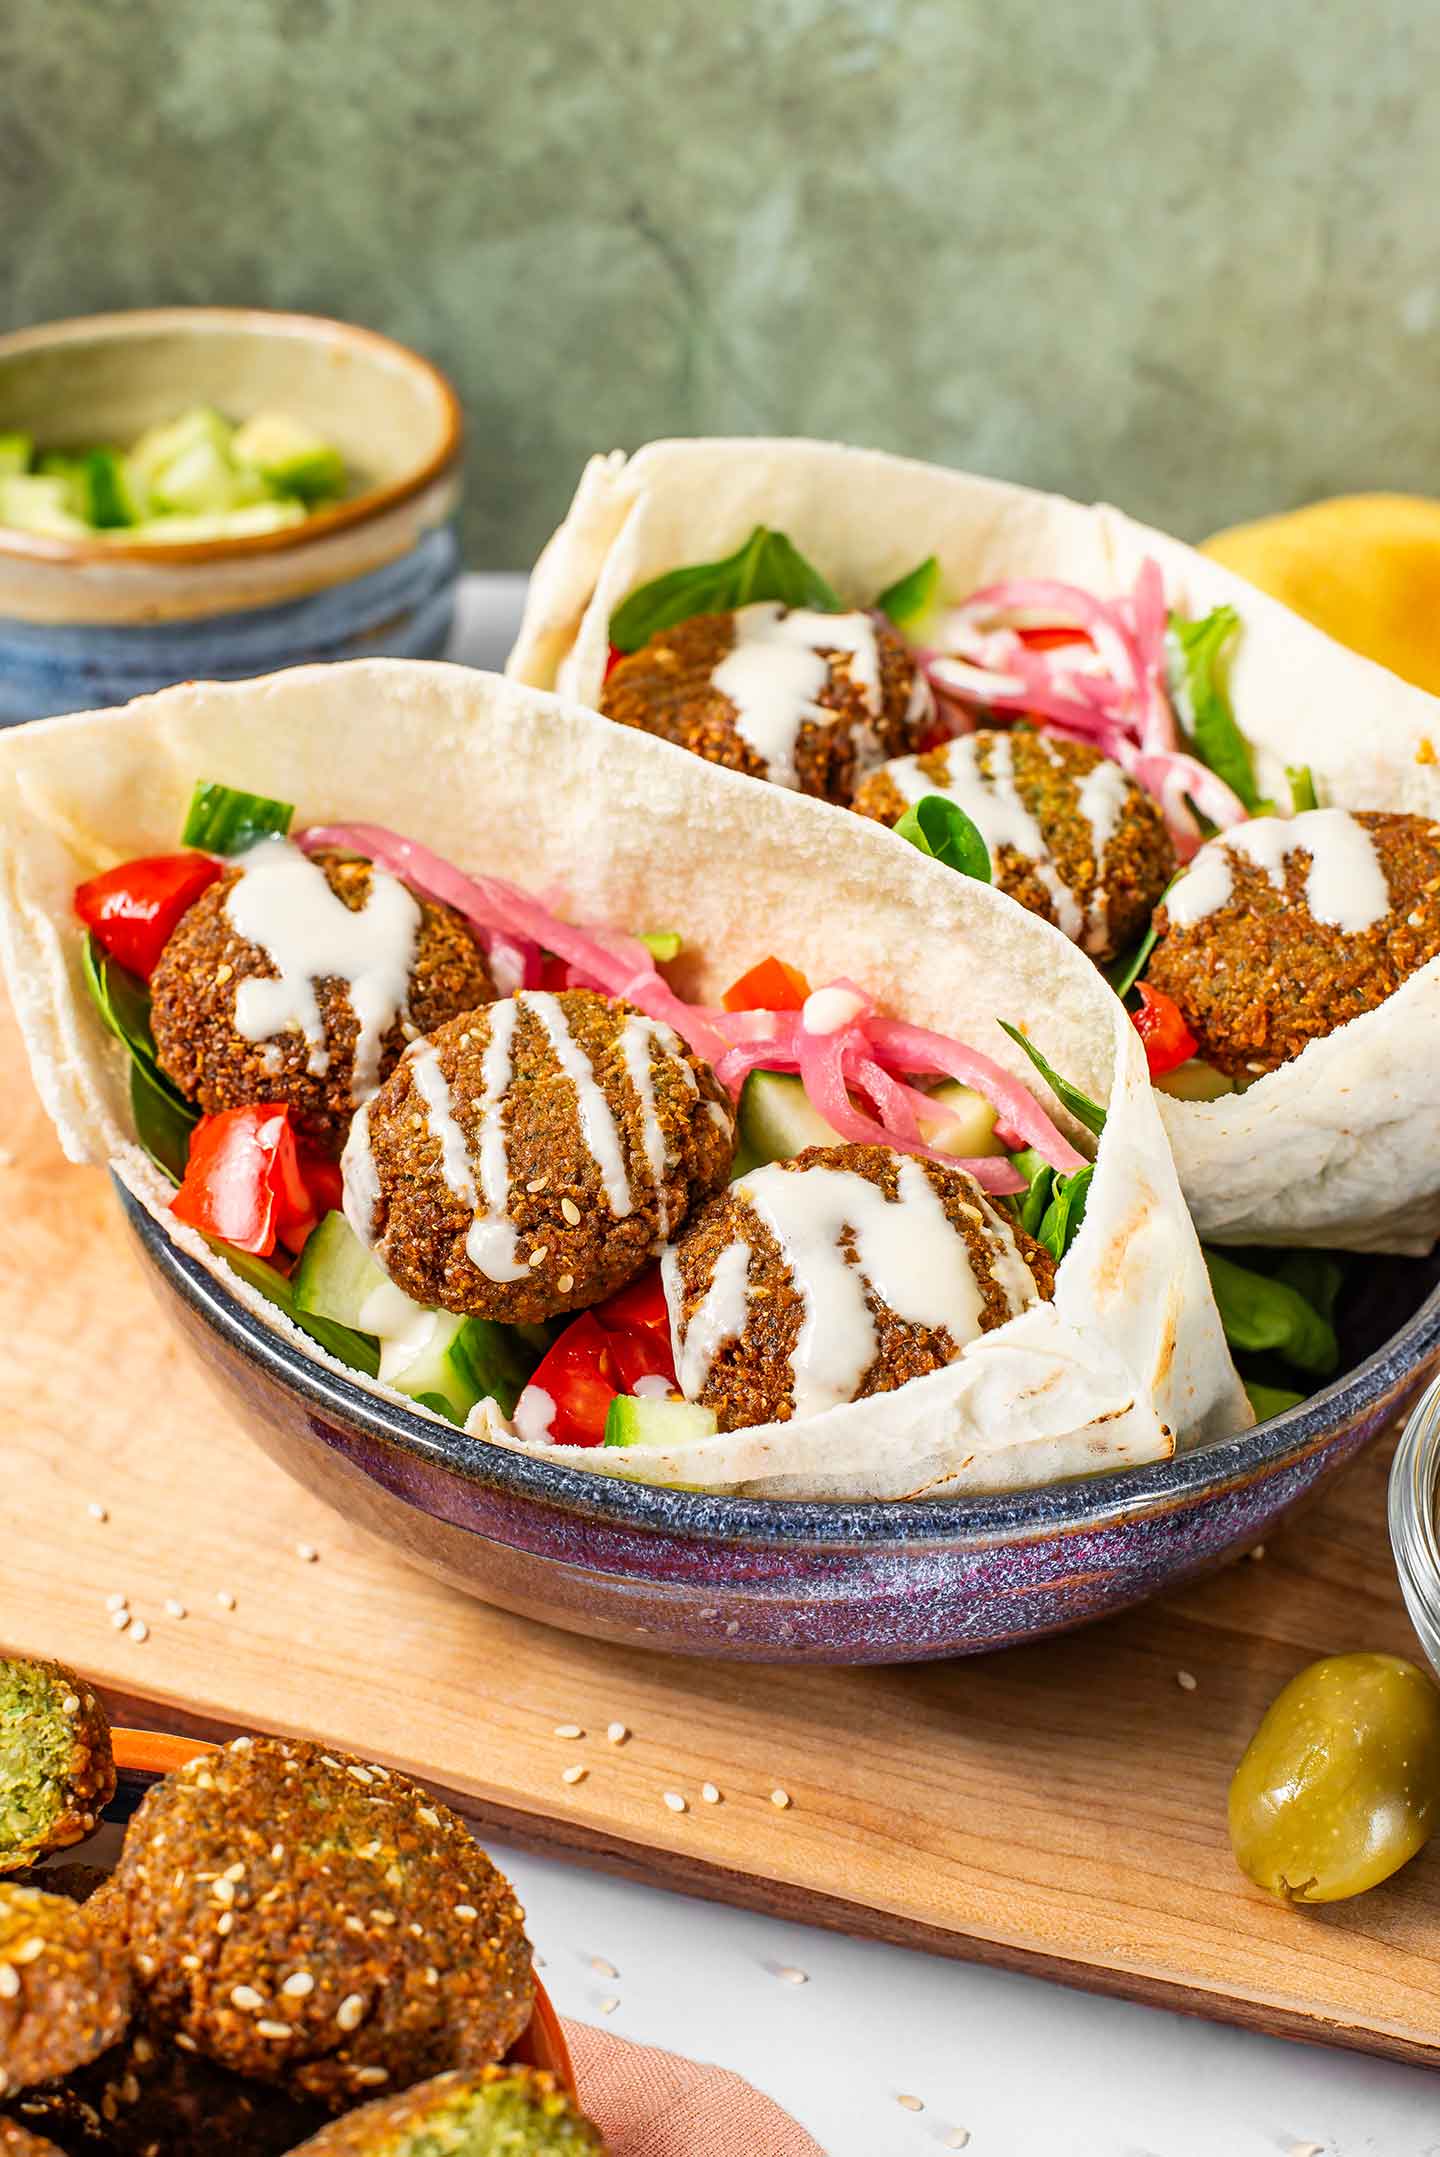 Crispy falafel sit atop a bed of spinach, tomato and cucumber in two halves of a pita pocket. A creamy tahini dressing is drizzled over the fillings.